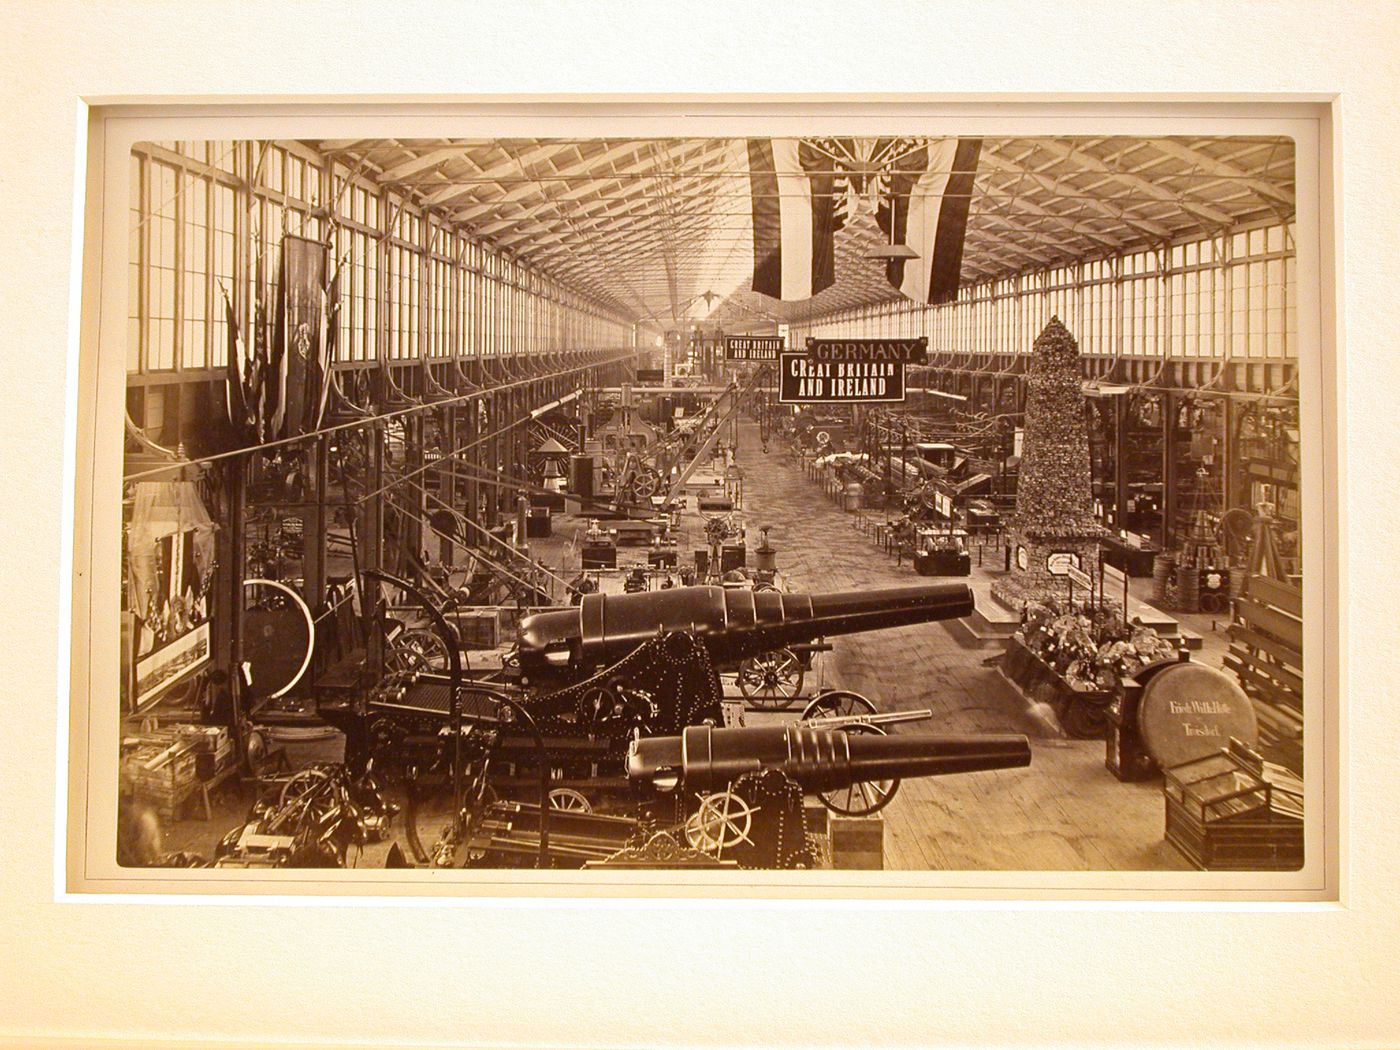 Interior view of Centennial International Exhibition of 1876, showing exhibits of canons, Germany, Great Britain and Ireland, Philadelphia, Pennsylvania, United States